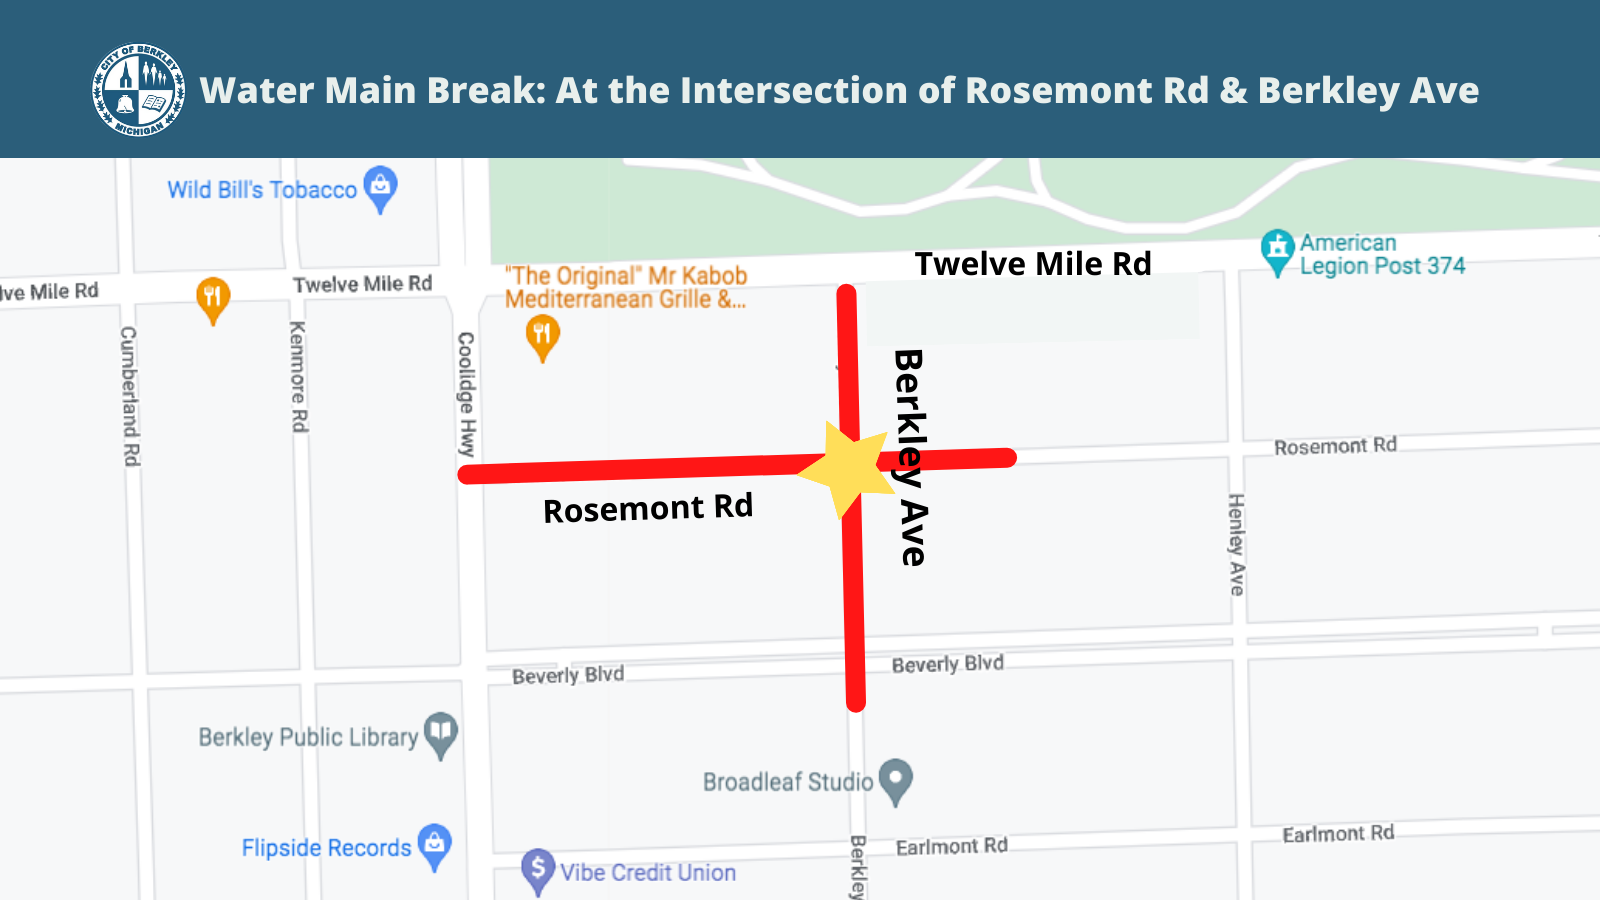 Water Main Break Maps_At the Intersection of Rosemont Rd & Berkley Ave